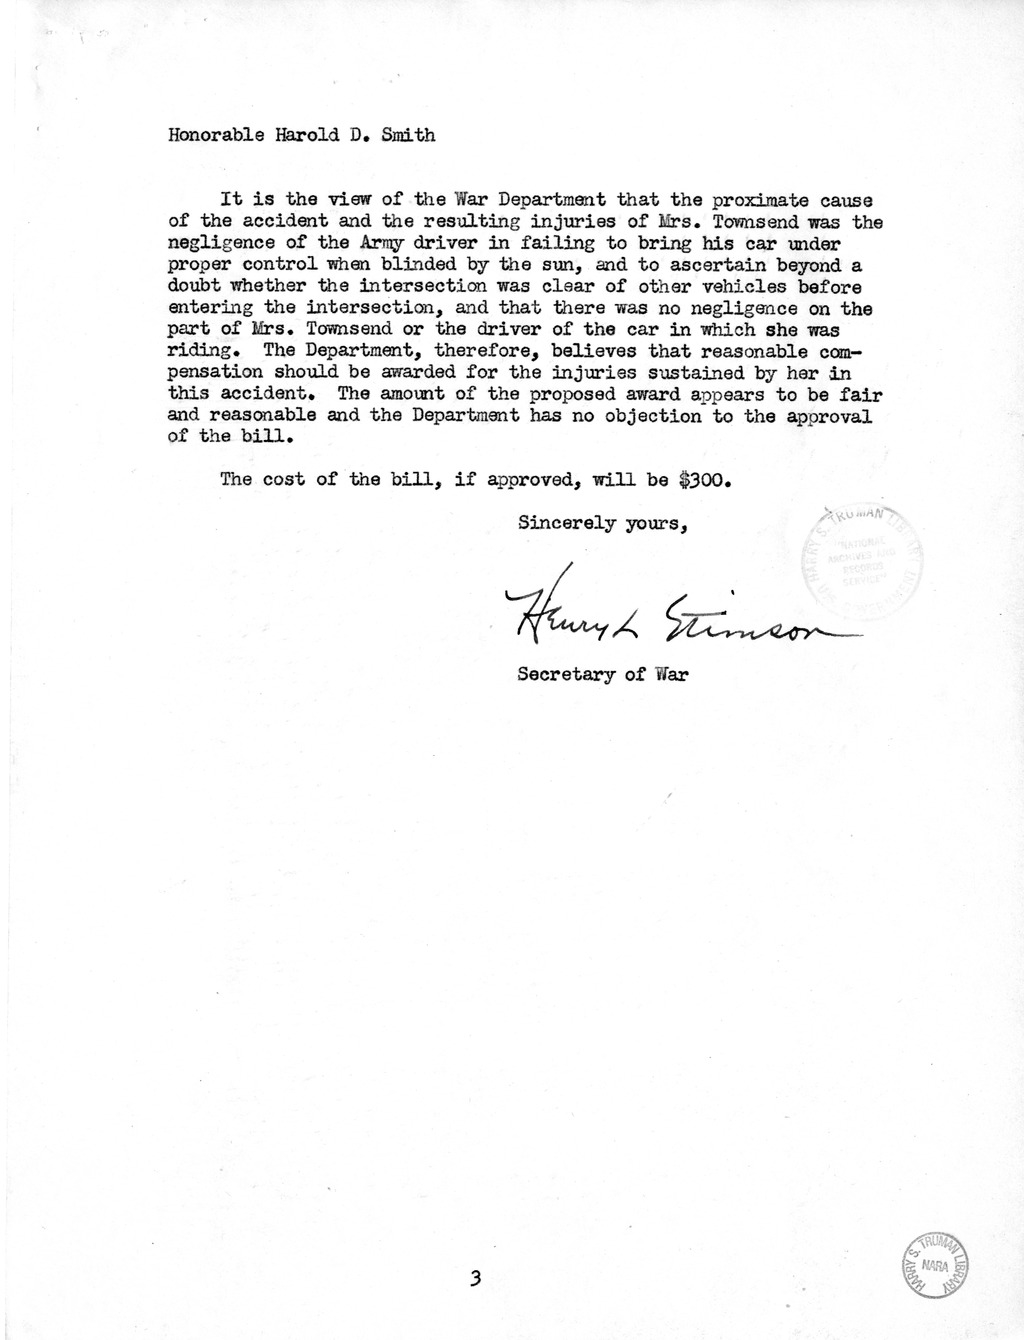 Memorandum from Frederick J. Bailey to M. C. Latta, H.R. 807, For the Relief of Mrs. Wilma Louise Townsend, with Attachments